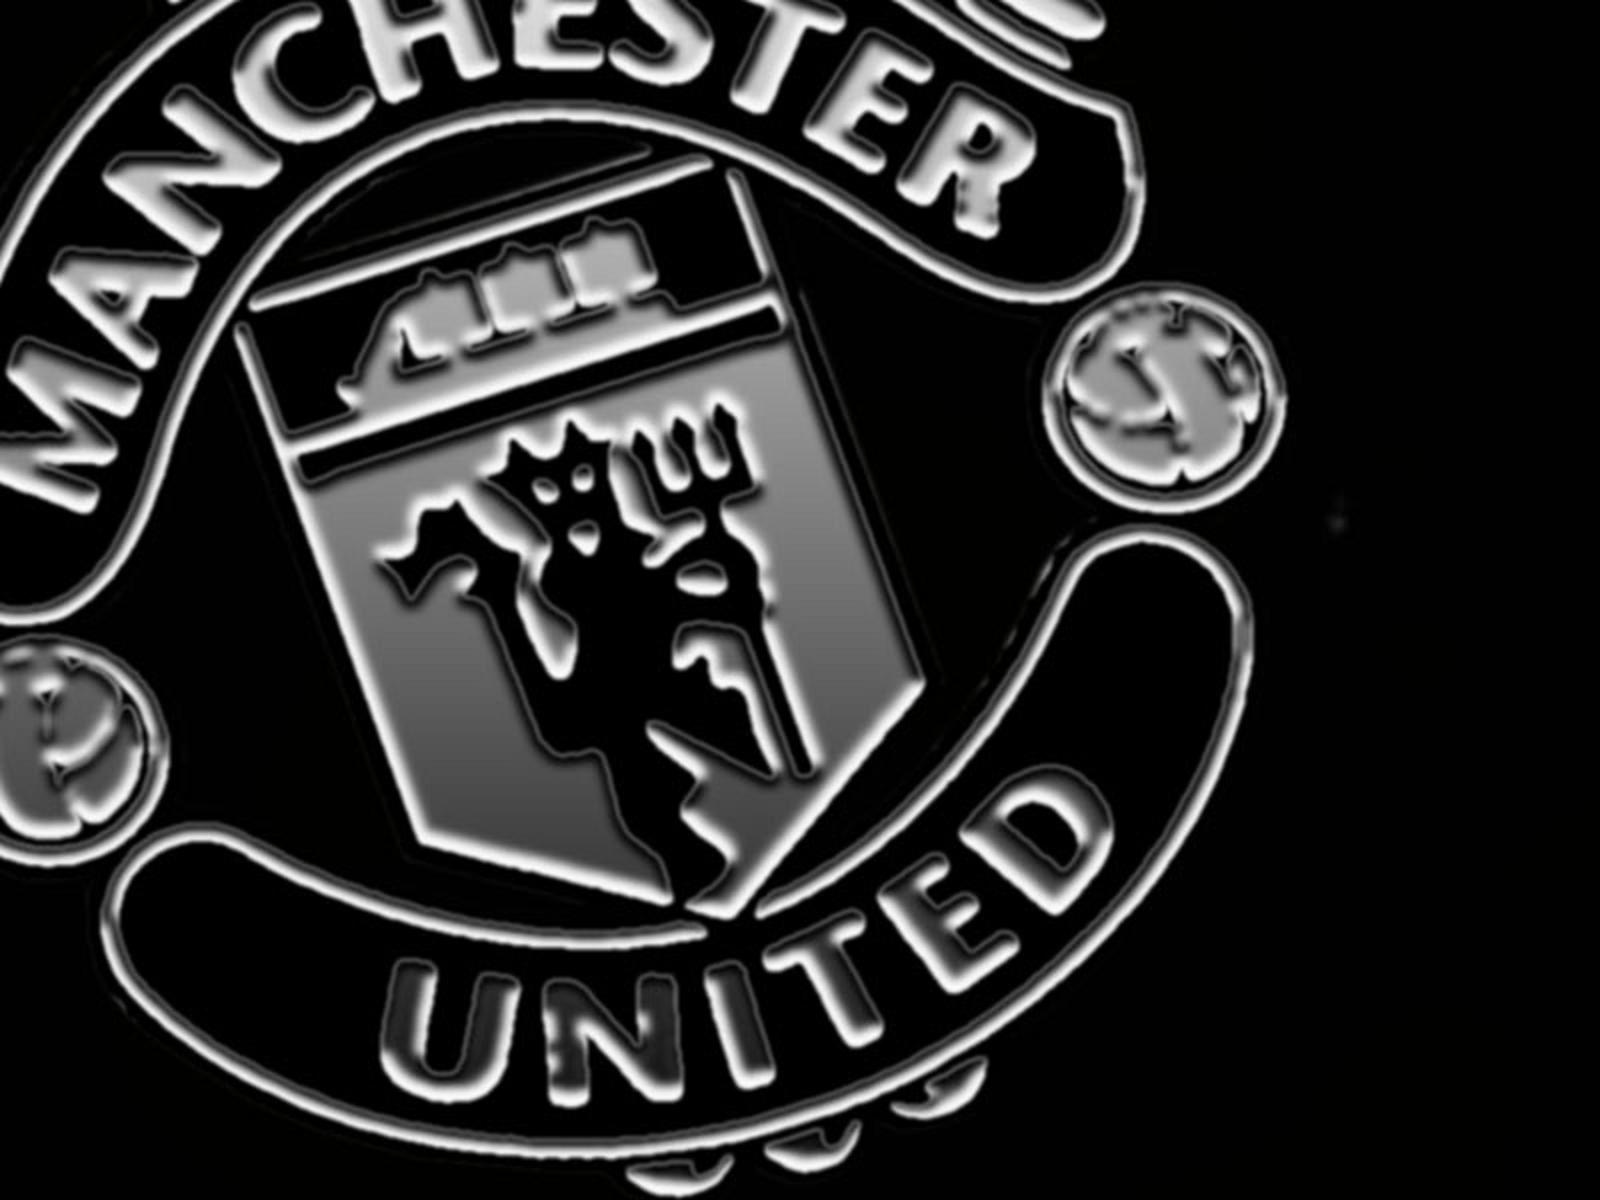 Manchester United Logo Cool Sport Wallpapers - Manchester United -  1600x1200 Wallpaper 